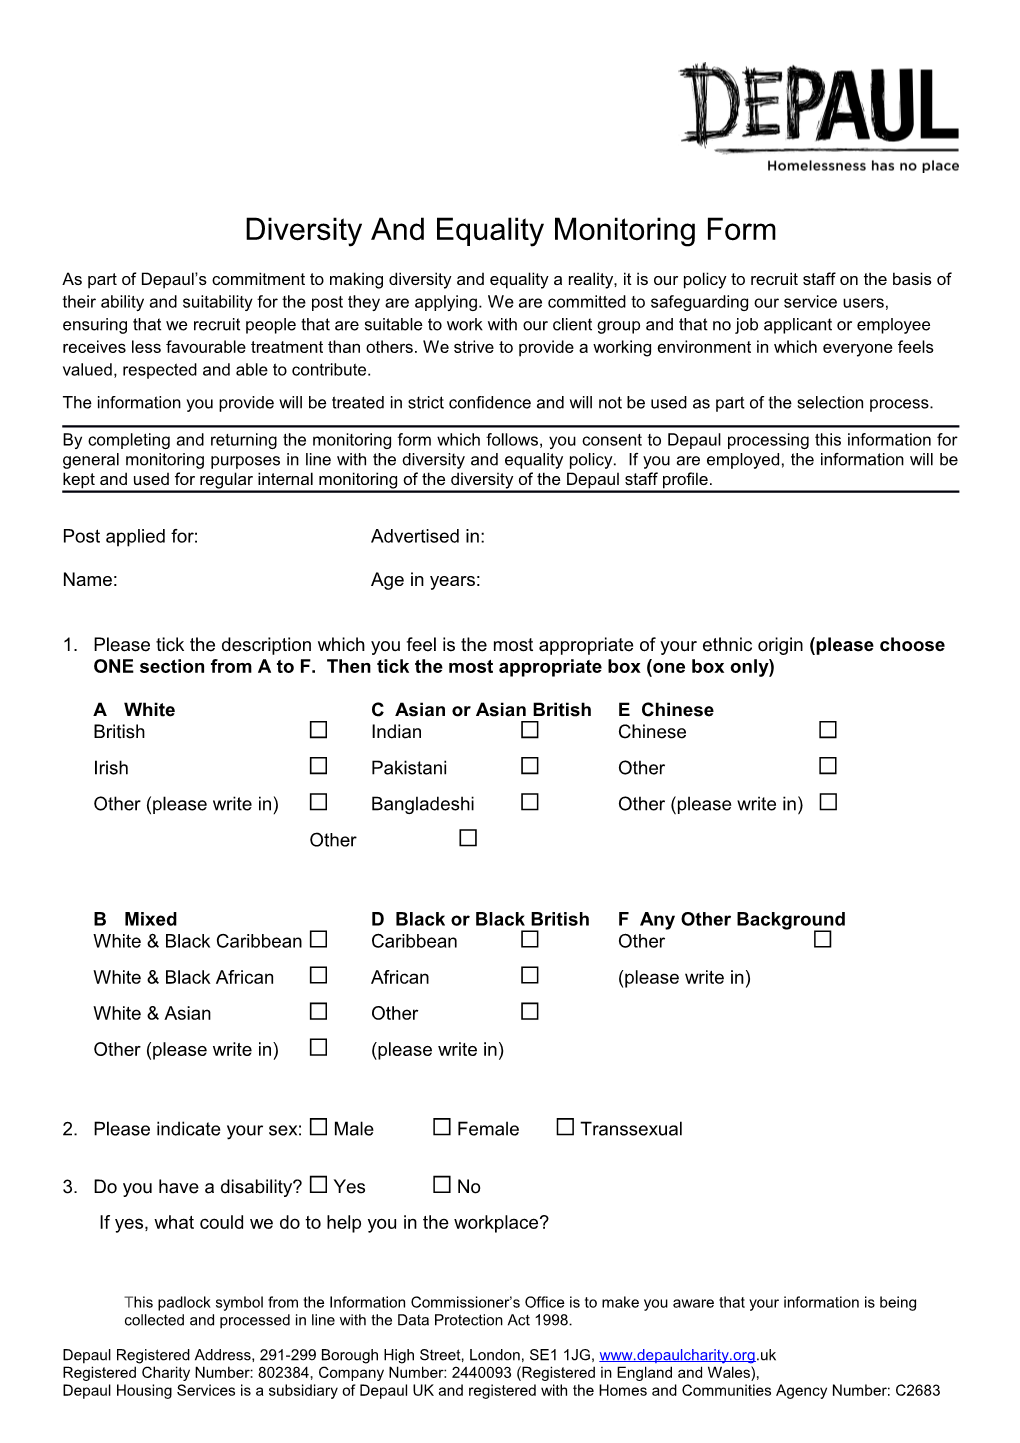 Diversity and Equality Monitoring Form